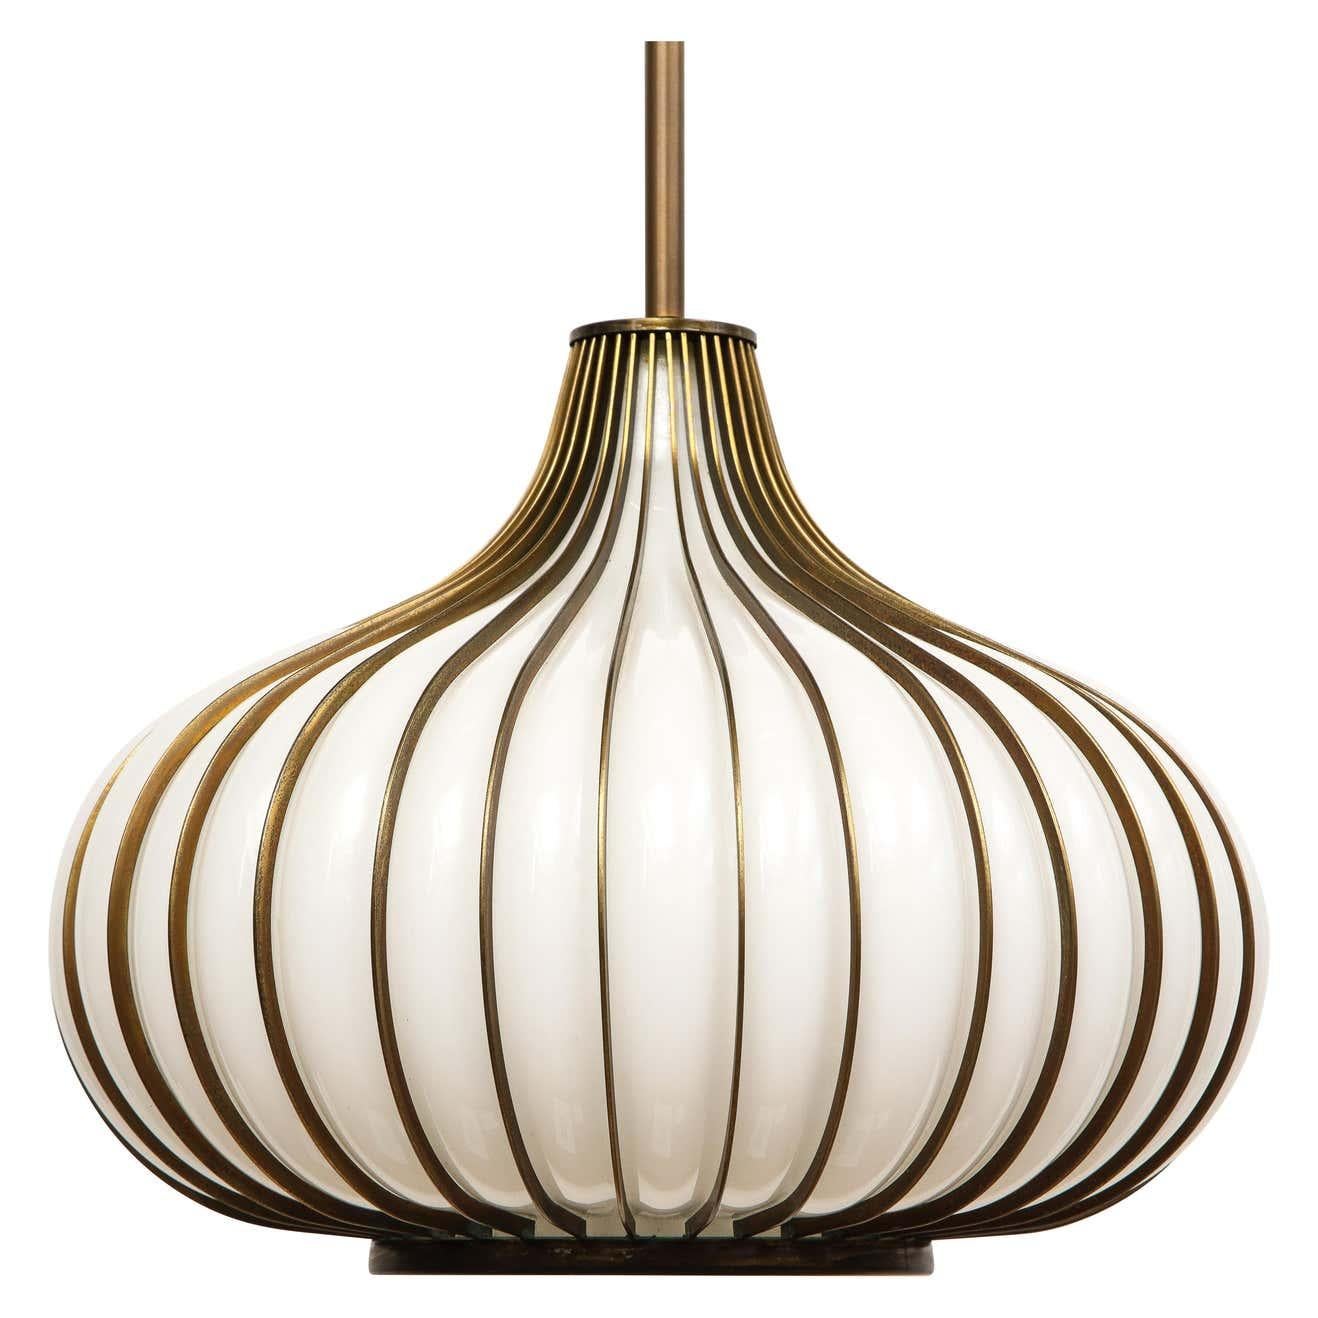 Pair of Onion pendant lamps, glass, brass, California Modern. Medium scale 15 inch swag lights with white hand blown glass, encased by edge metal with an antique brass/bronze finish. Designed and manufactured by Lightcraft of California in the